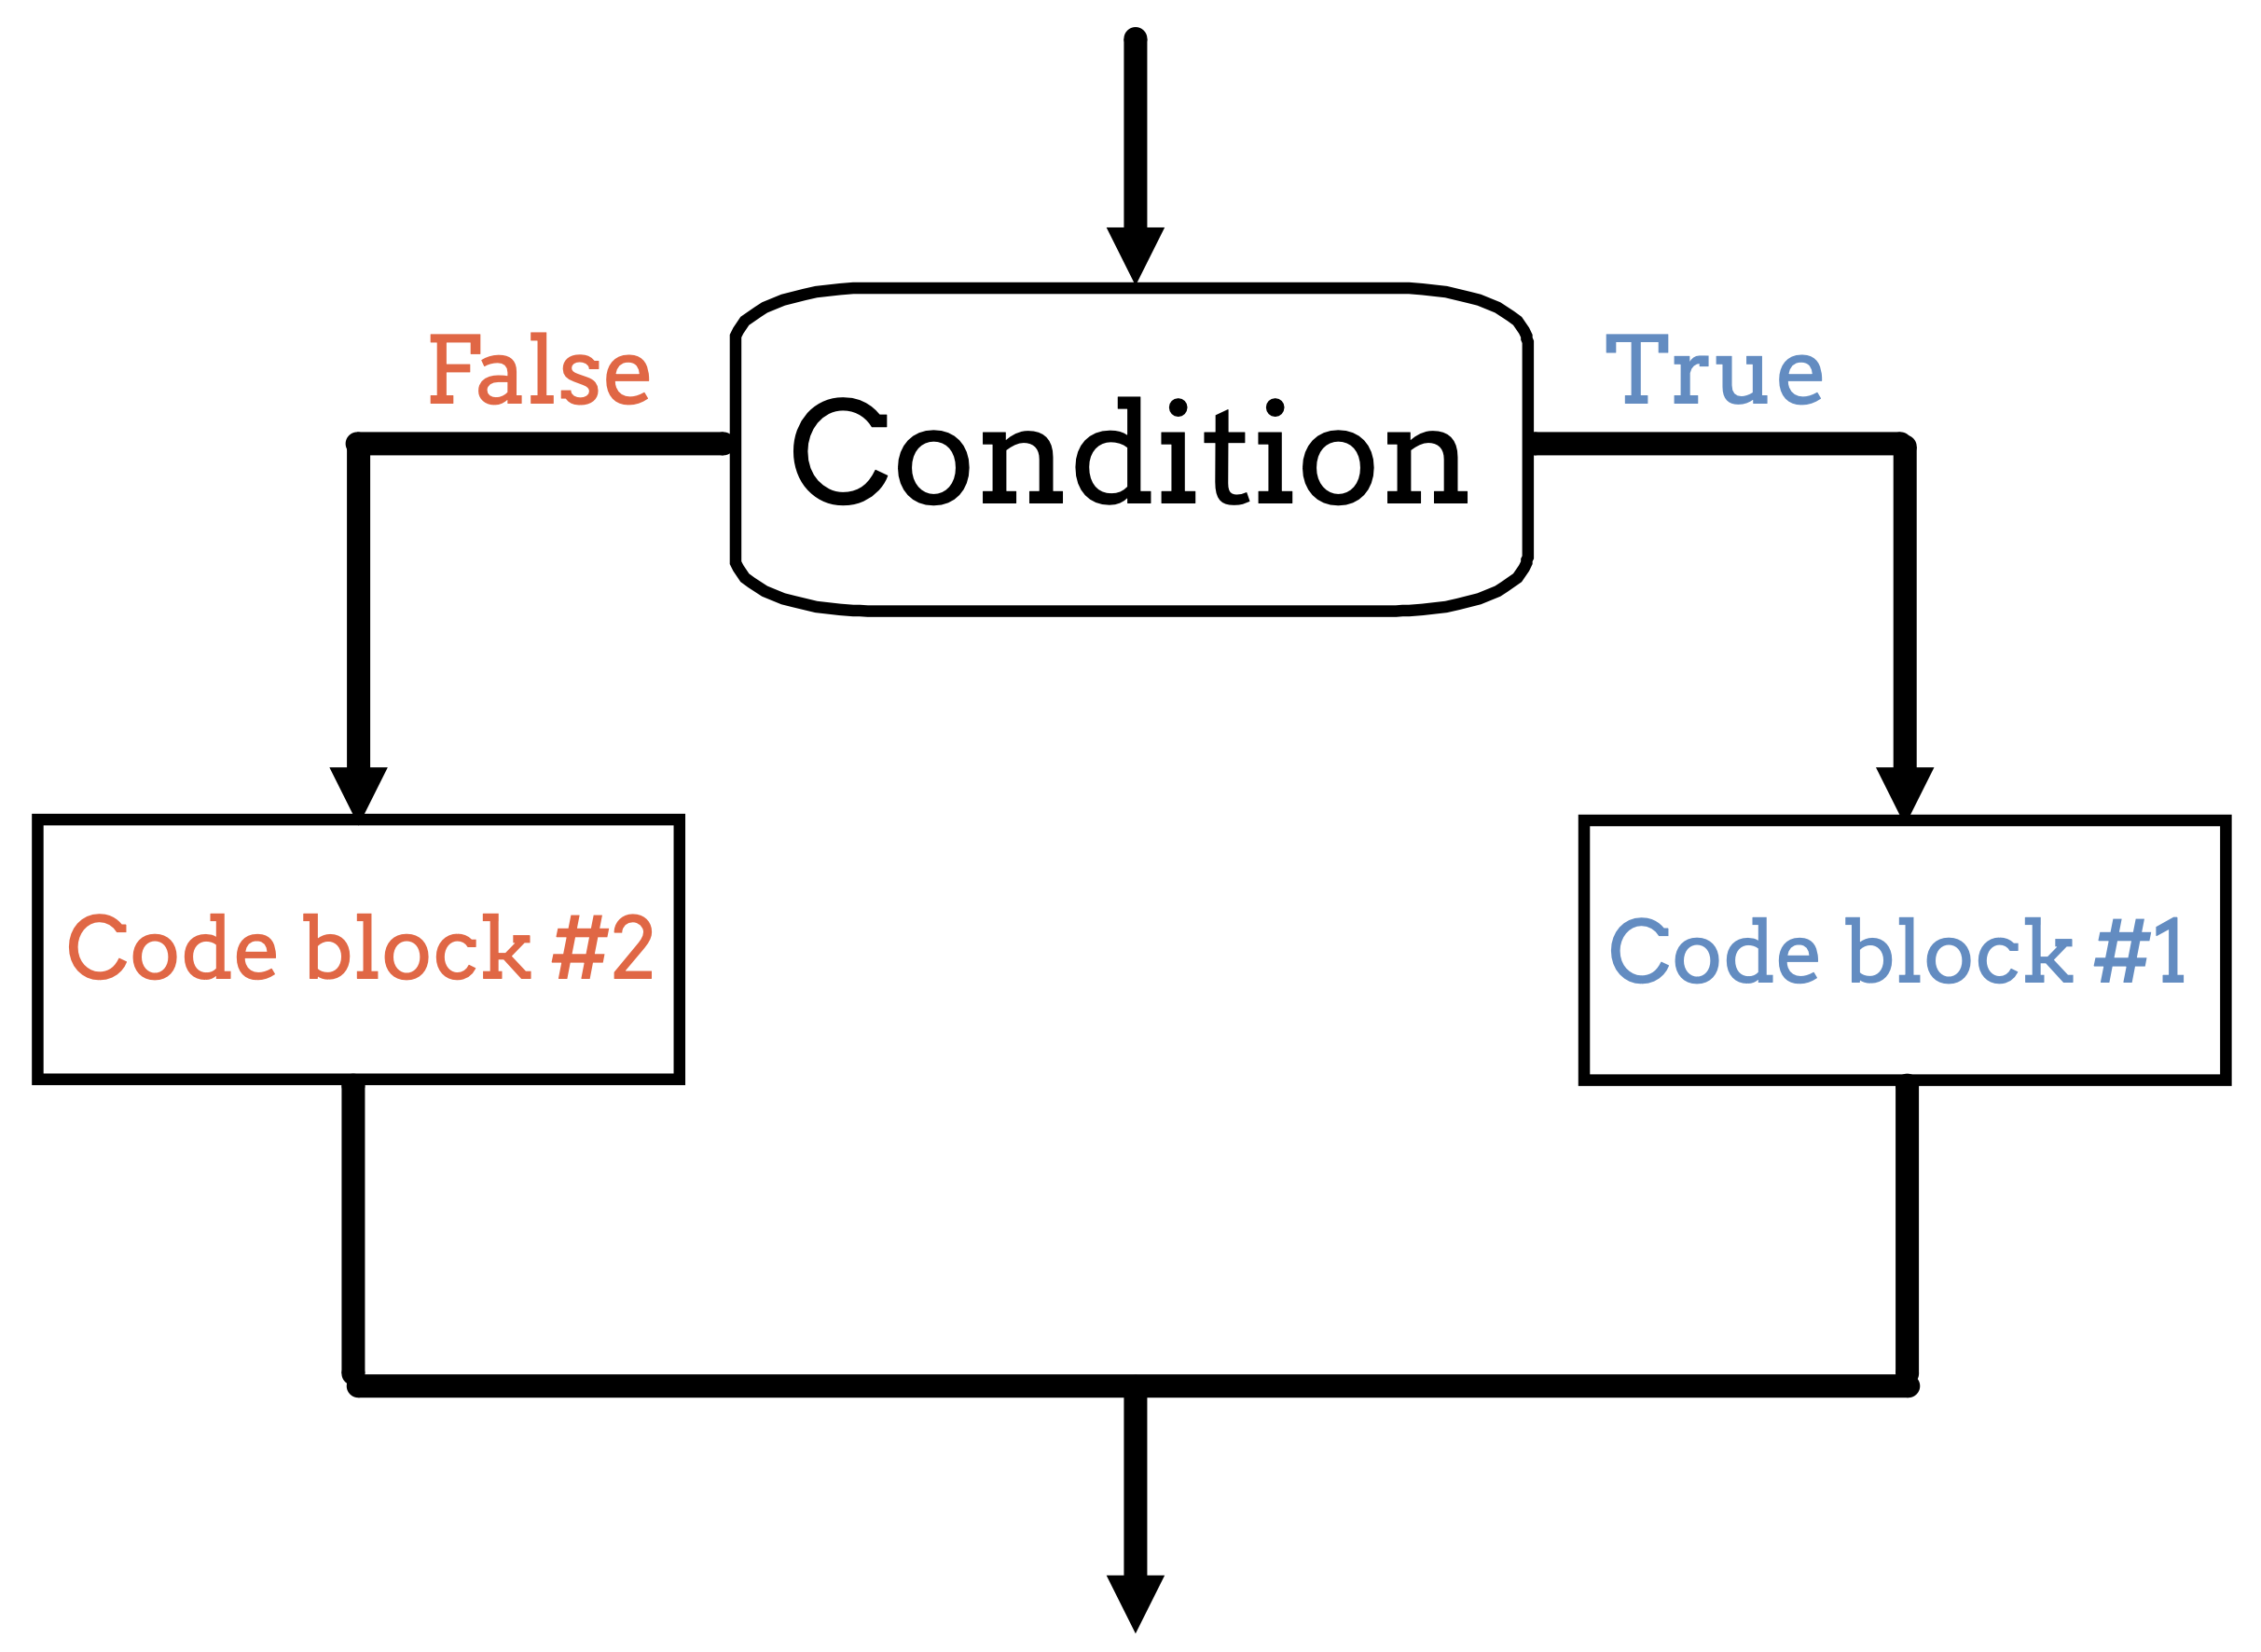 A diagram showing how the flow of a program branches based on the value of the condition in an if-else statement. If the condition is true, one code block executes. If the condition is false, a different code block executes.